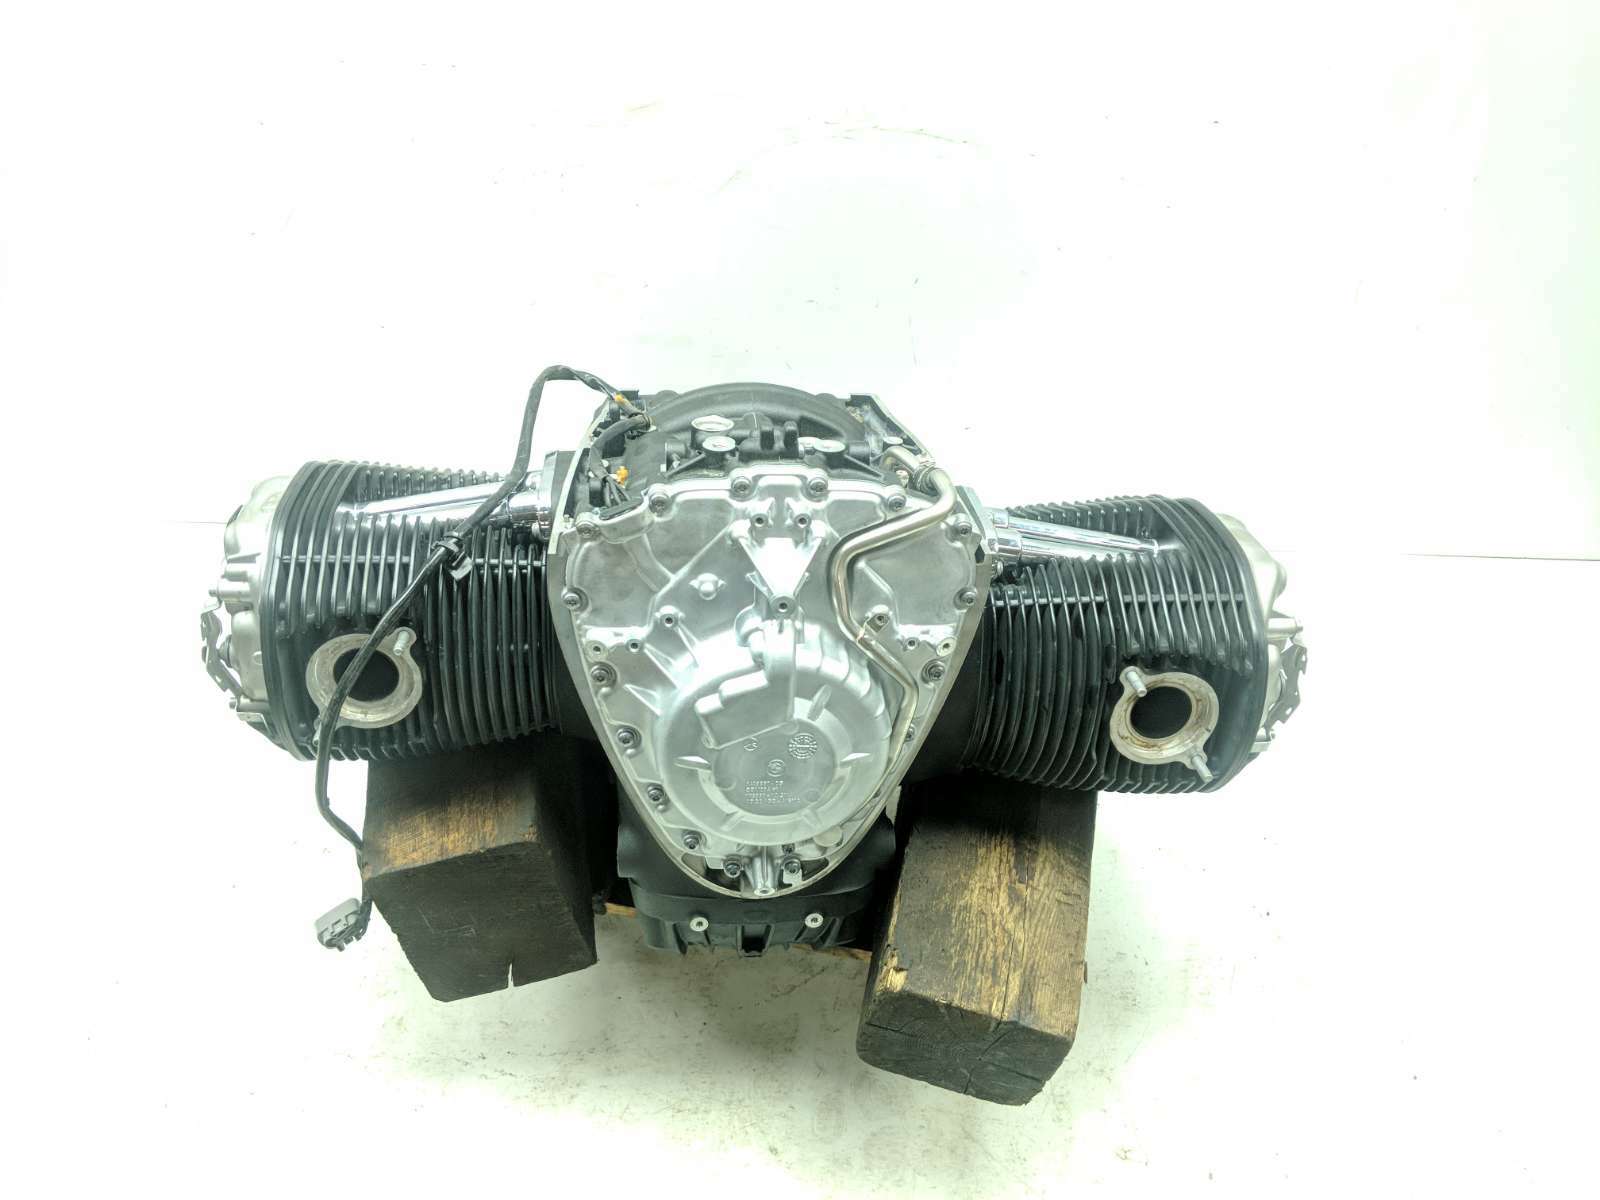 22 BMW R18 BEngine Motor Transmission GUARANTEED ONLY 2,667 MILES RUNS SEE VIDEO!